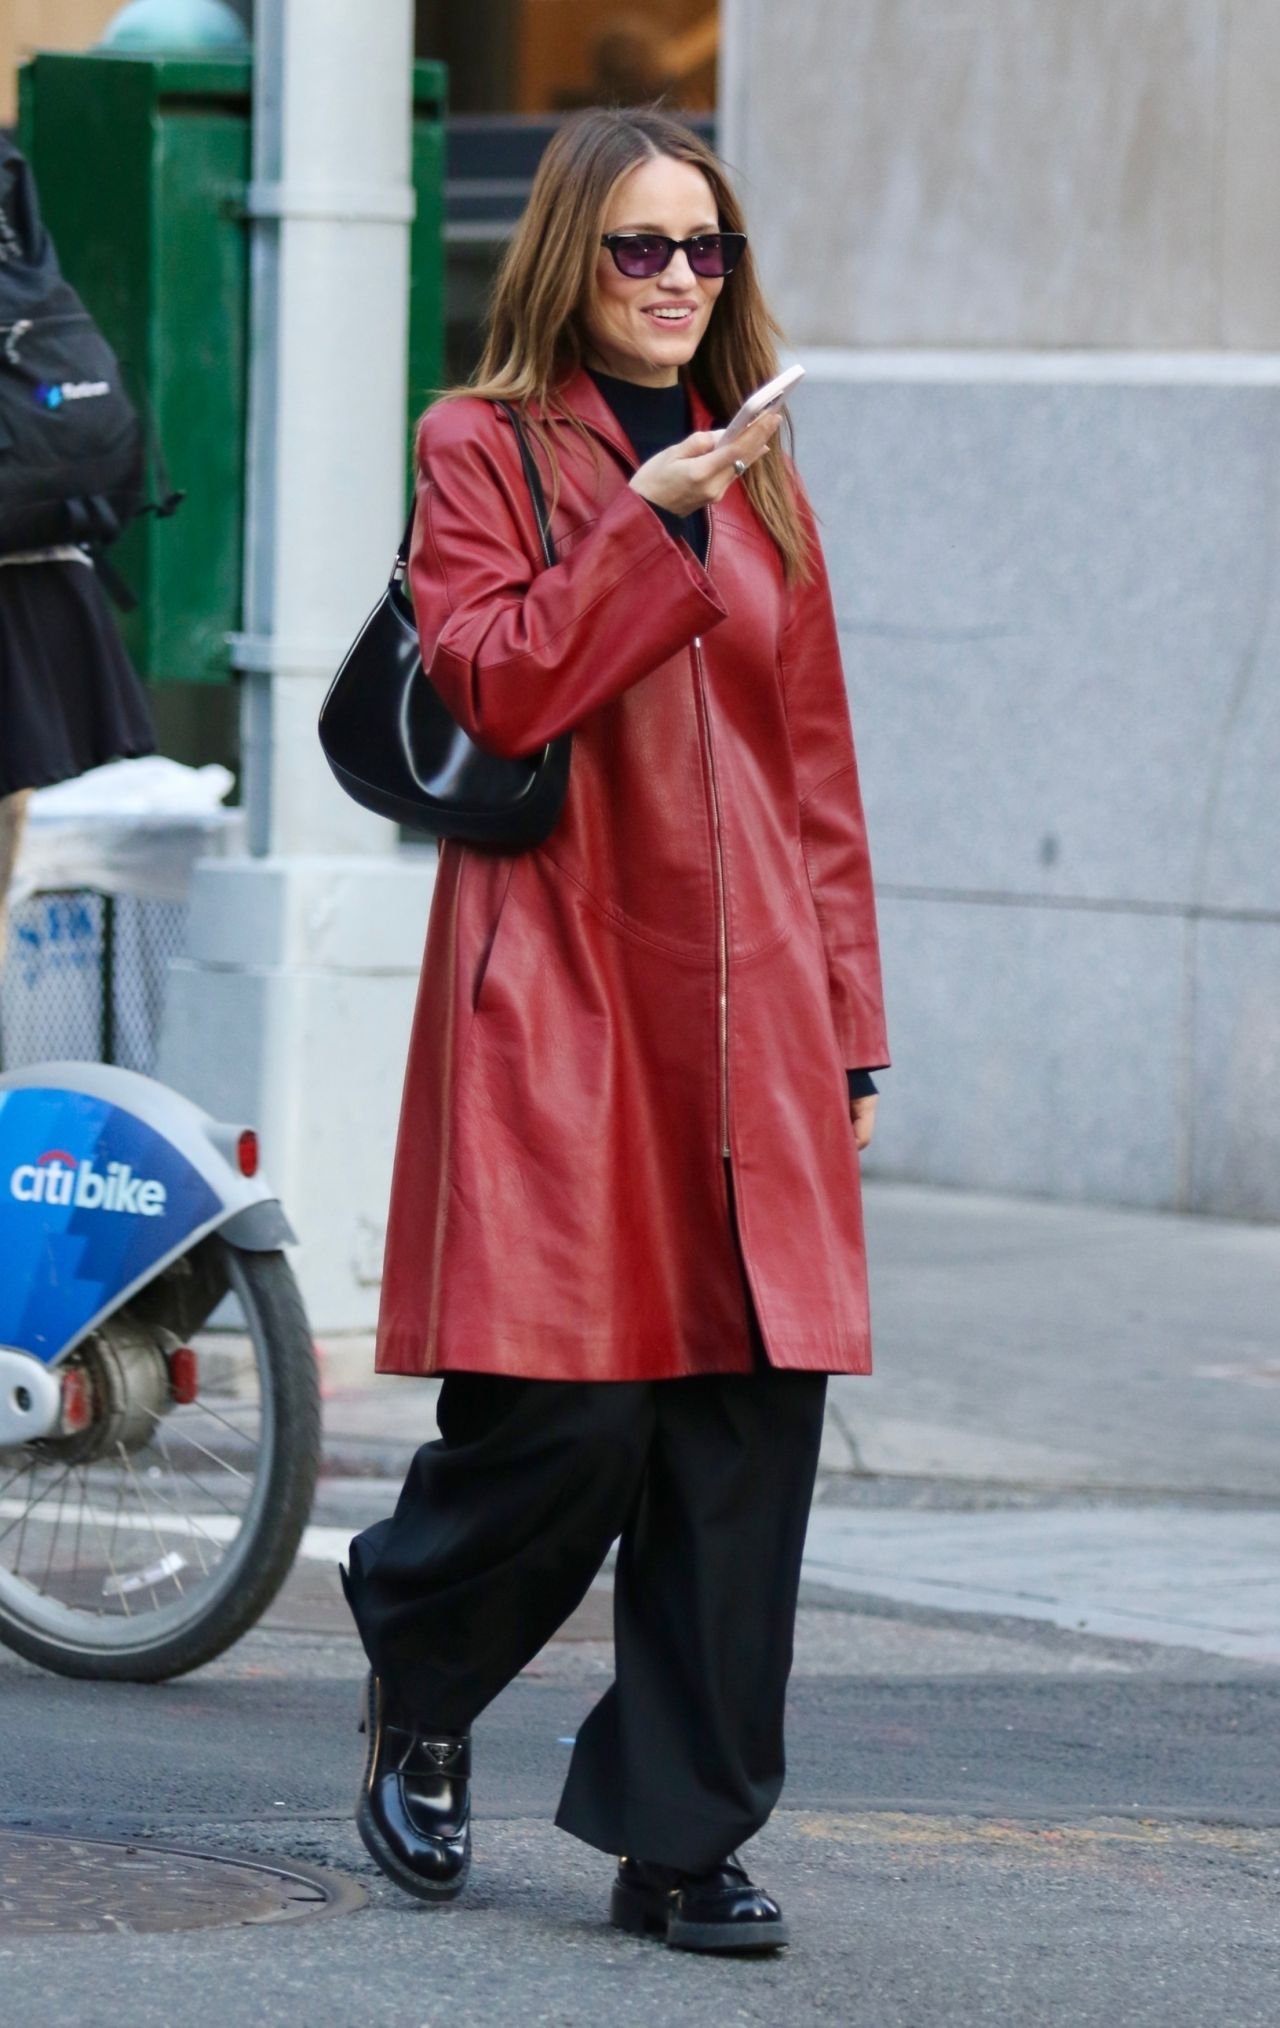 Dianna Agron In A Red Coat